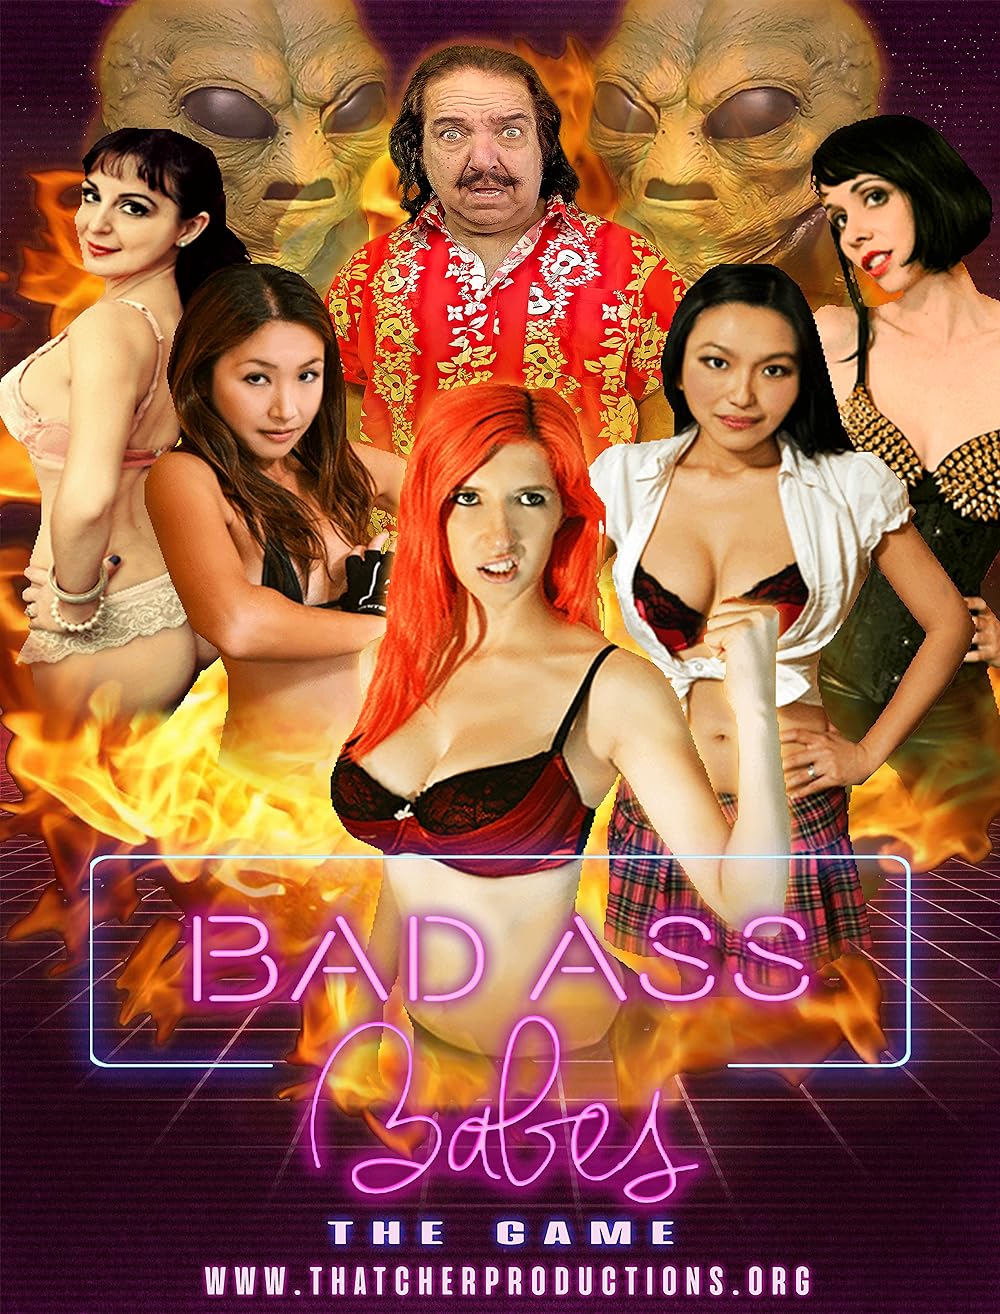 Bad Ass Babes [Finished] - Version: 3.0